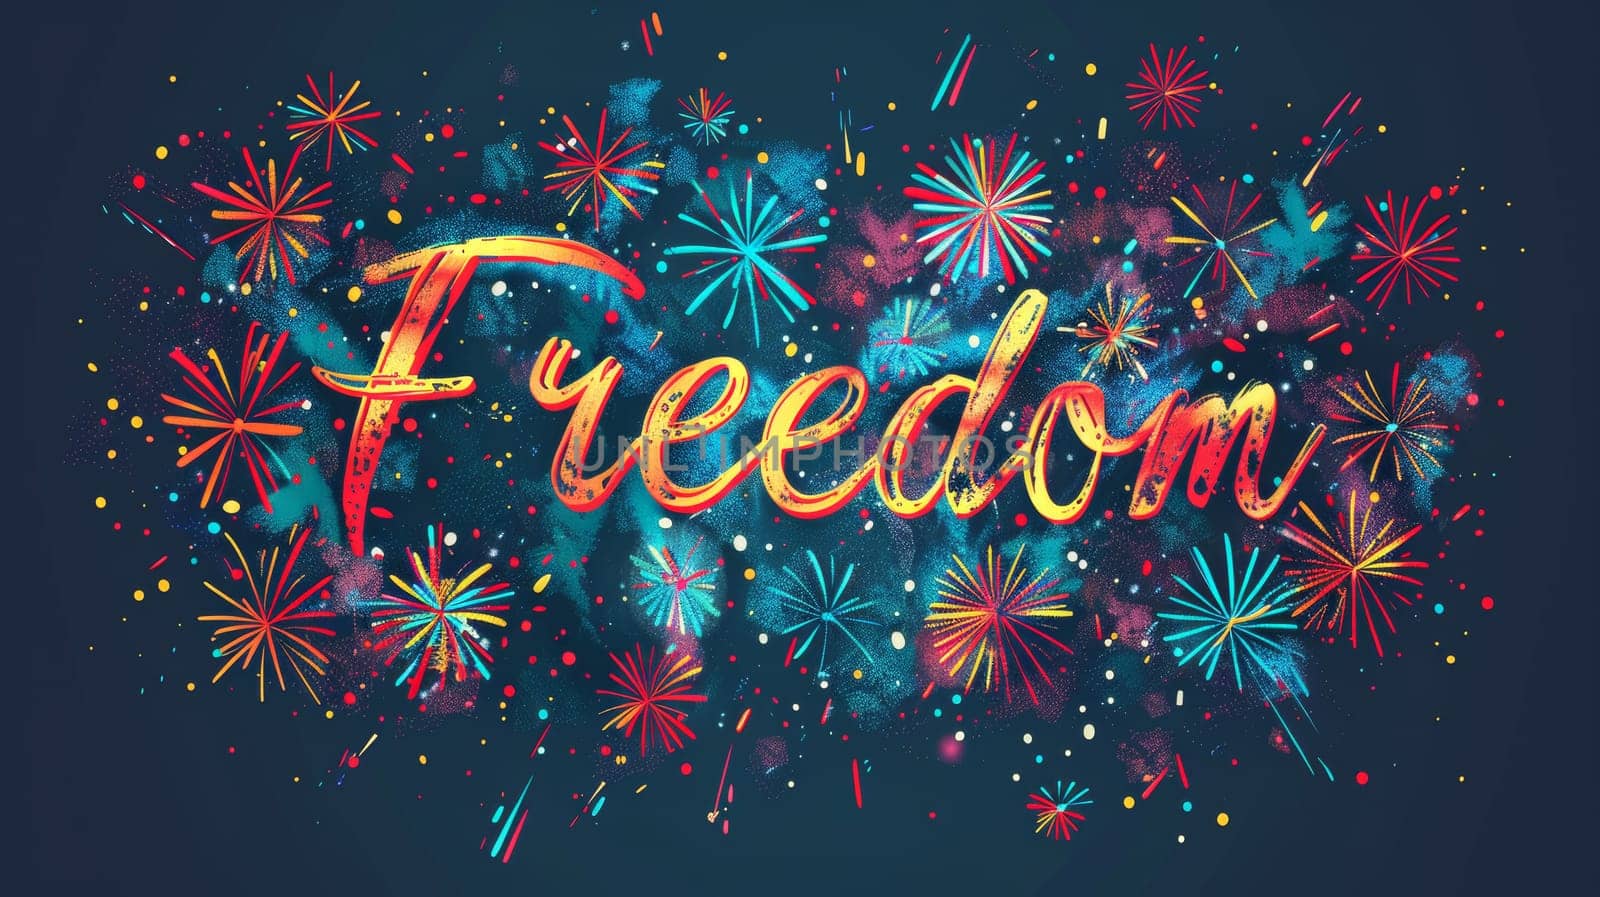 Freedom Text with Fireworks, Sparks, Smoke on Dark Background for Independence Day